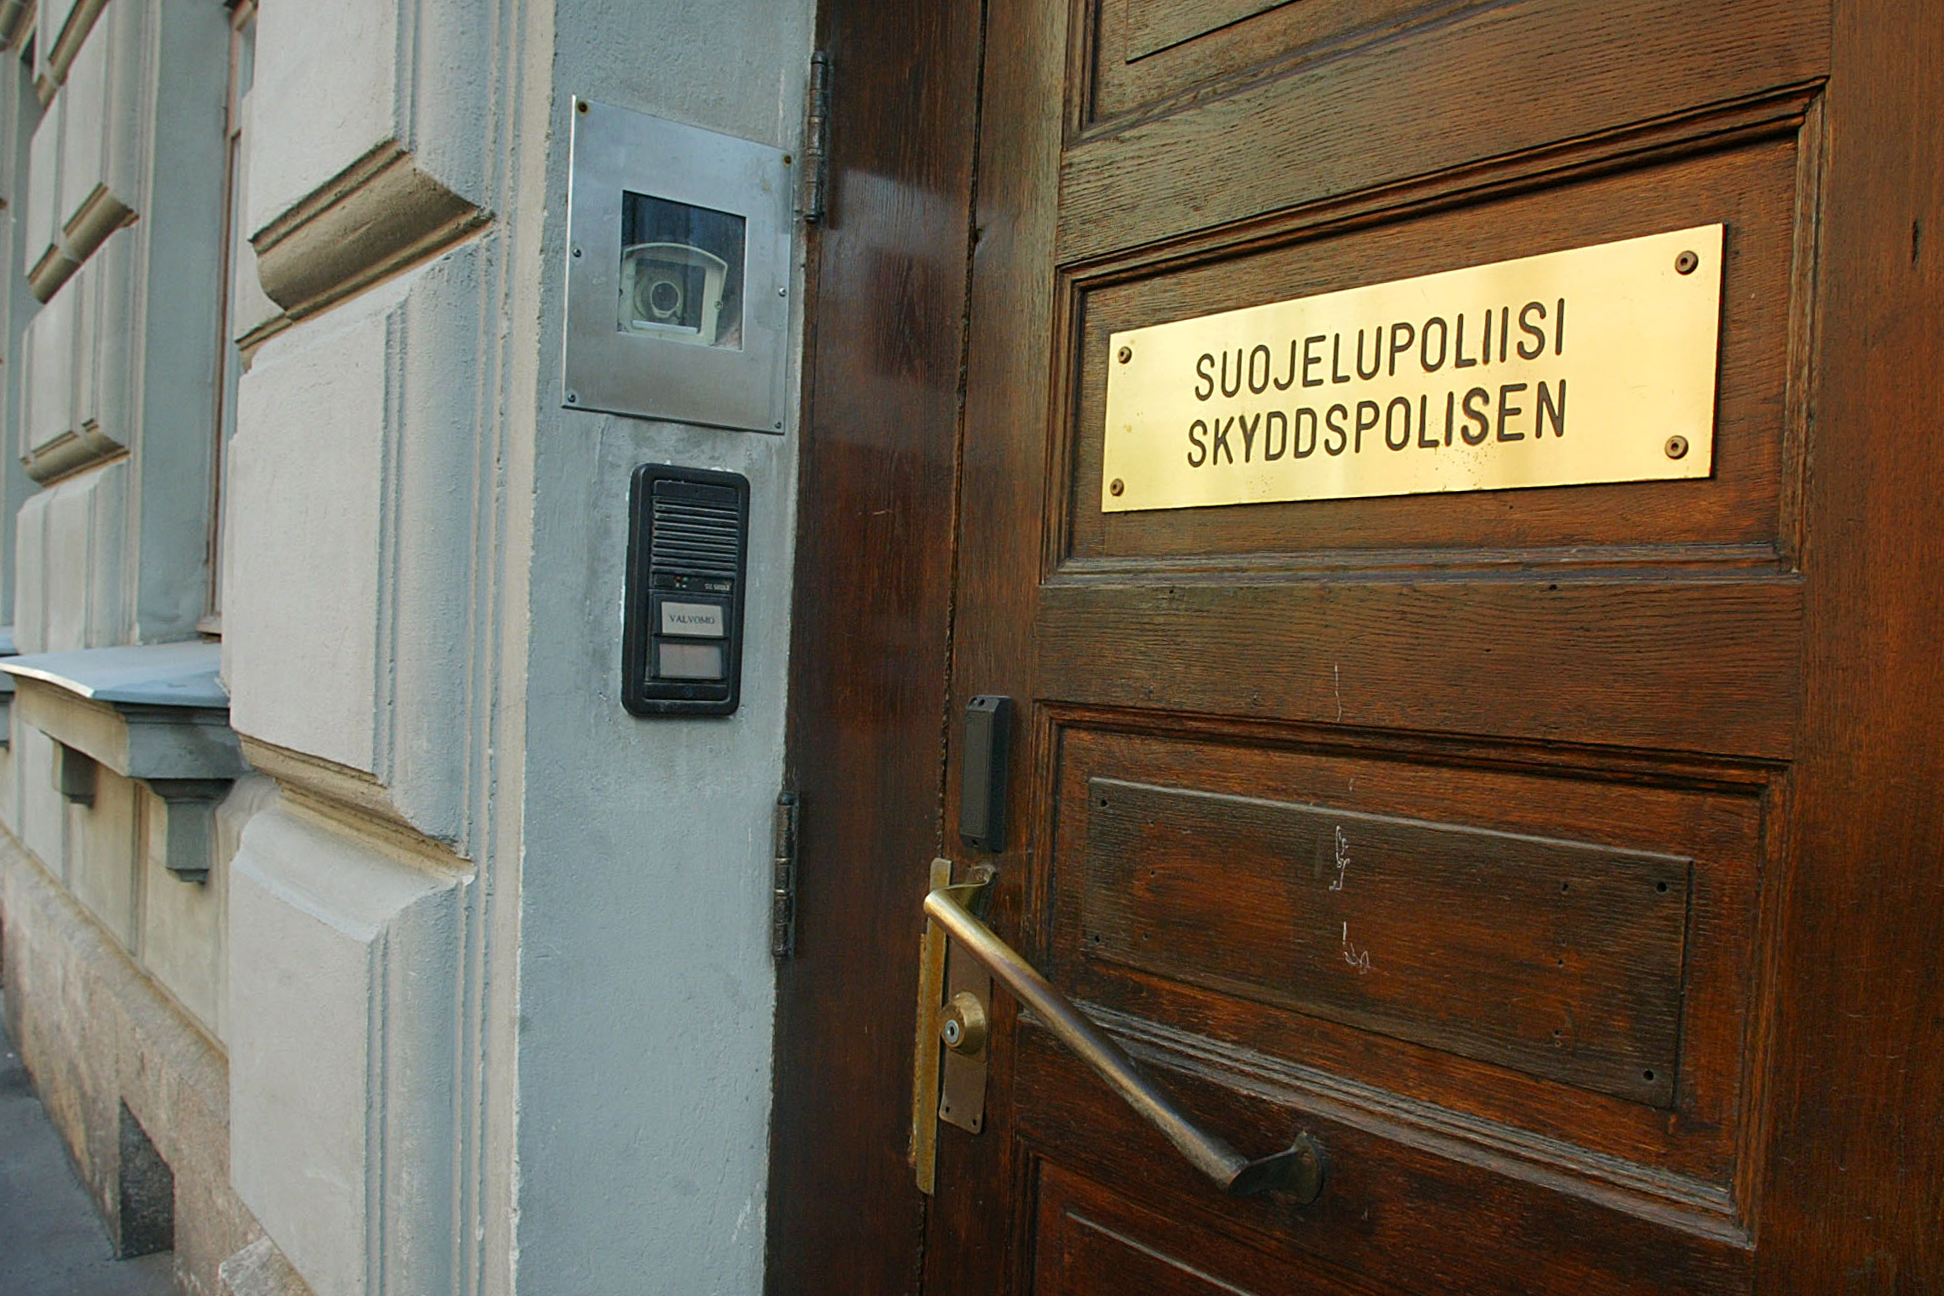 Supo: Finland is “constantly targeted” by foreign information espionage